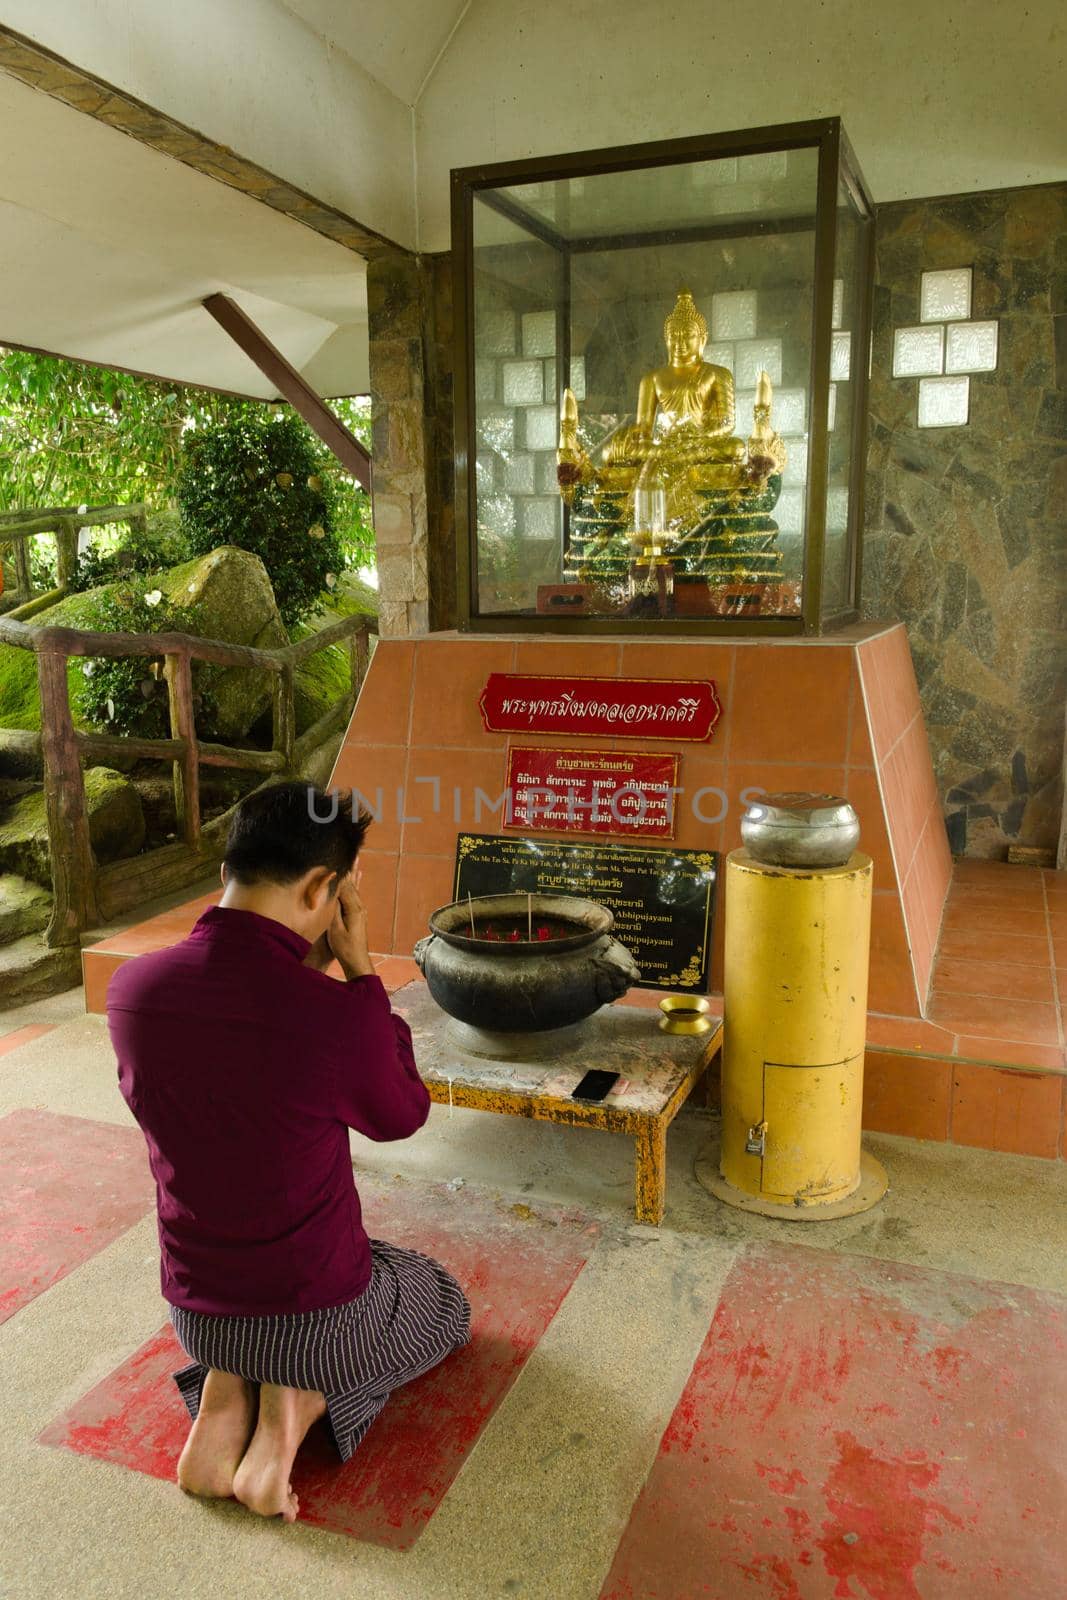 2019-11-06 / Phuket, Thailand - A kneeling, bare-footed man praying to a golden statue of Buddha.